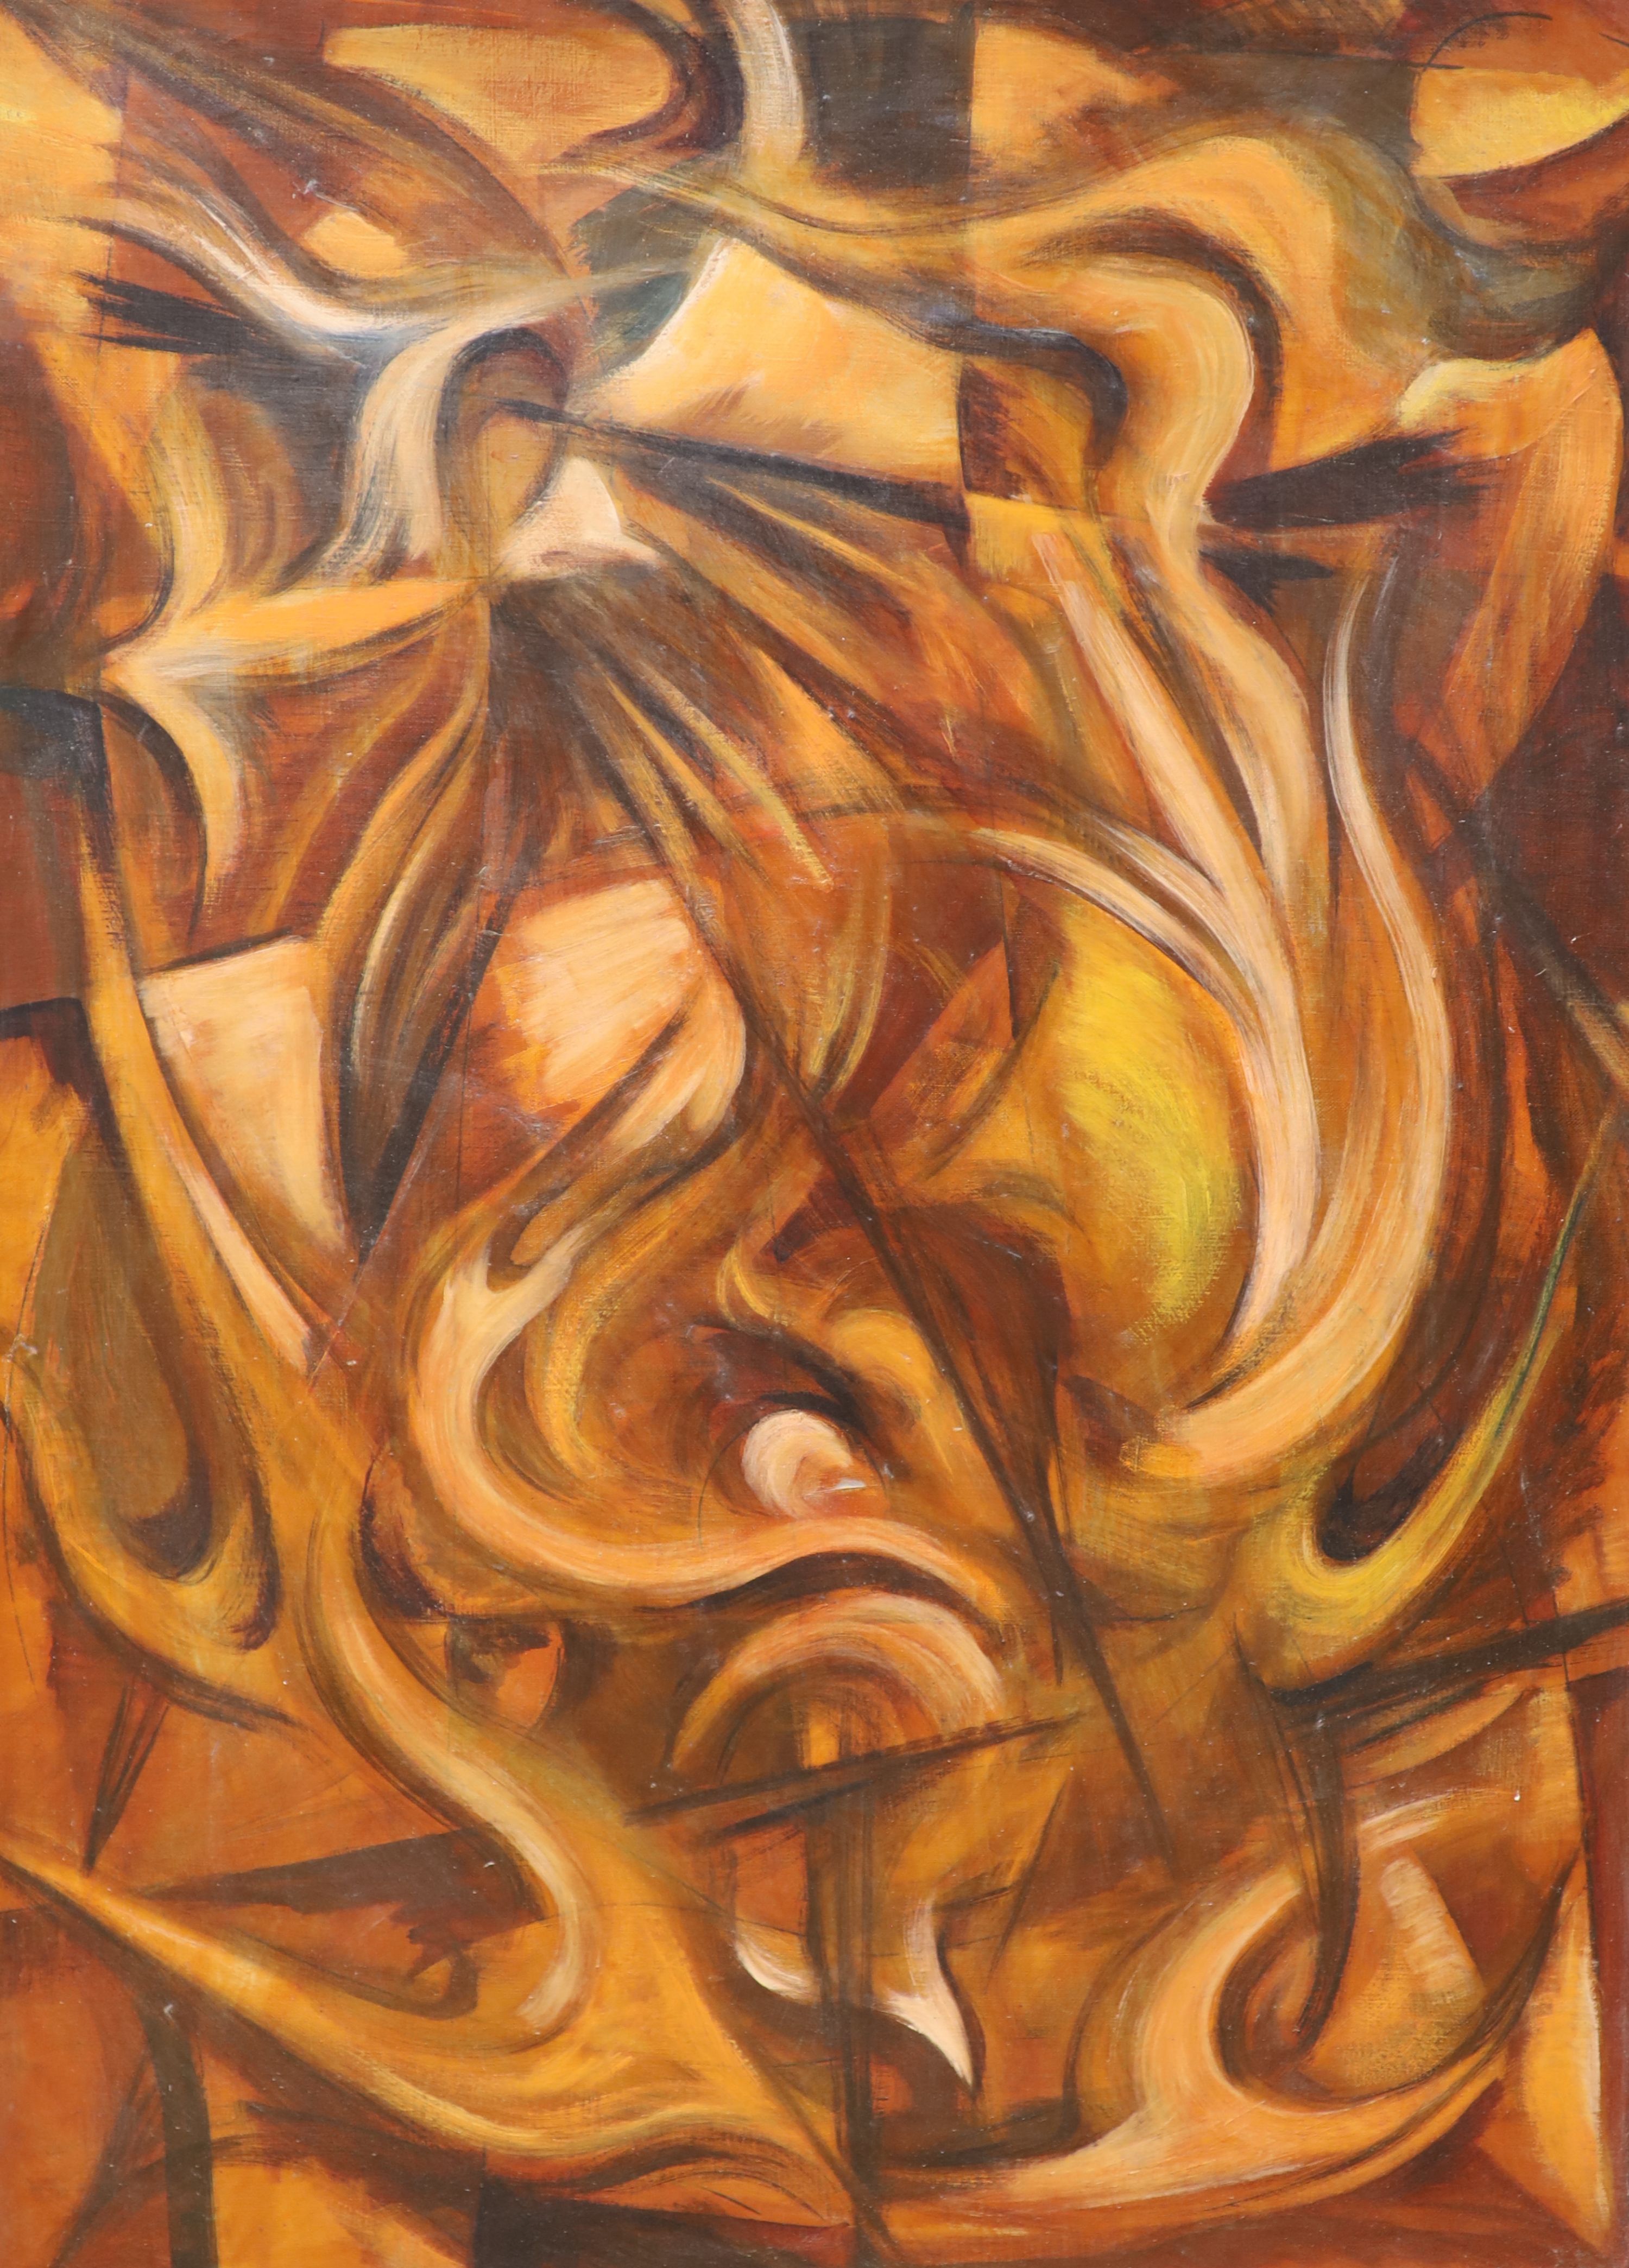 20th century continental school, an abstract composition in tones of red and amber, oil on canvas, unsigned 65 x 96cm.